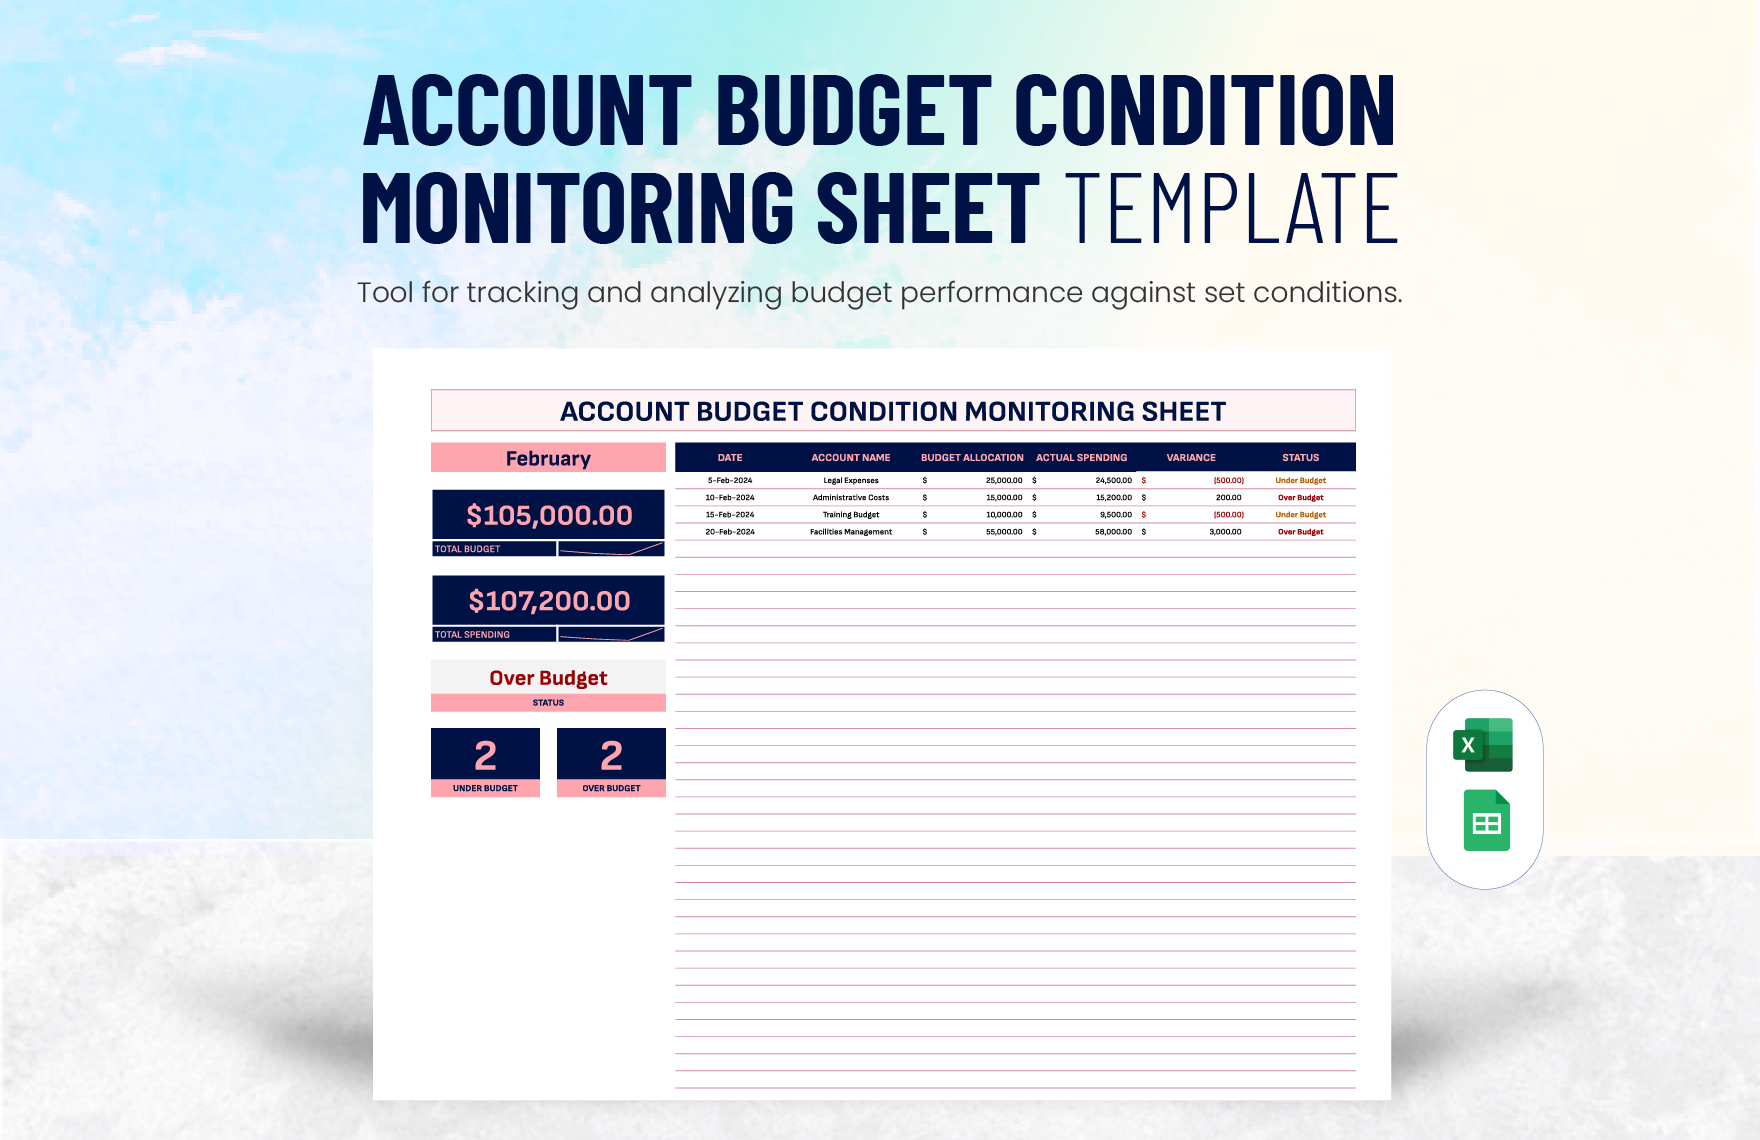 Account Budget Condition Monitoring Sheet Template